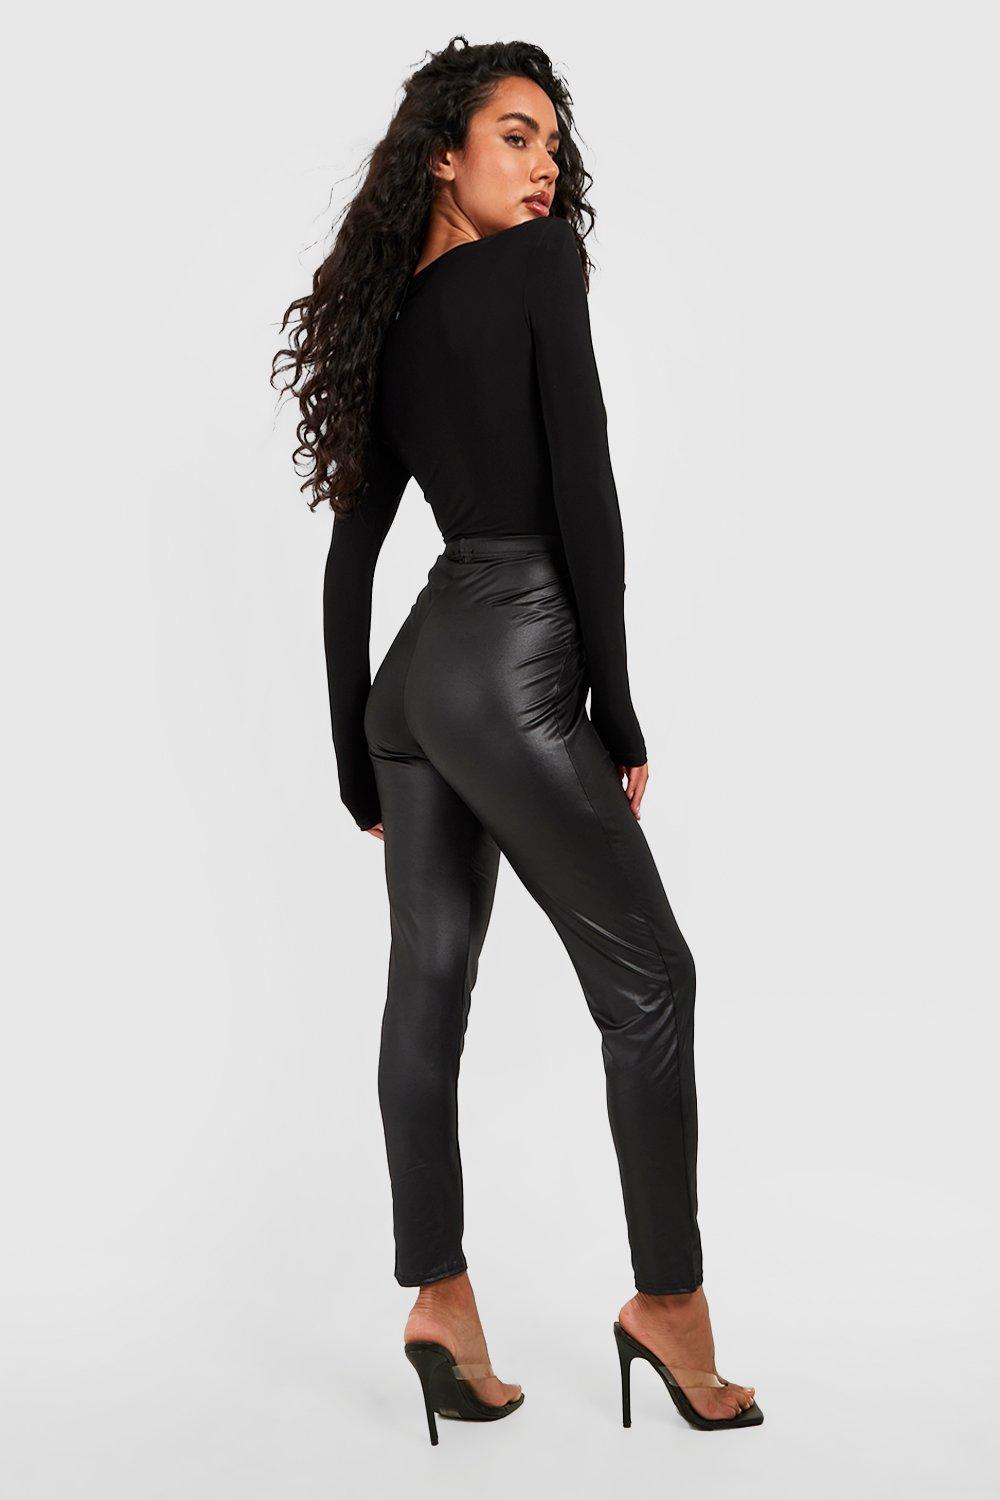 Black High Waisted Faux Leather Leggings – The Fashion Bible